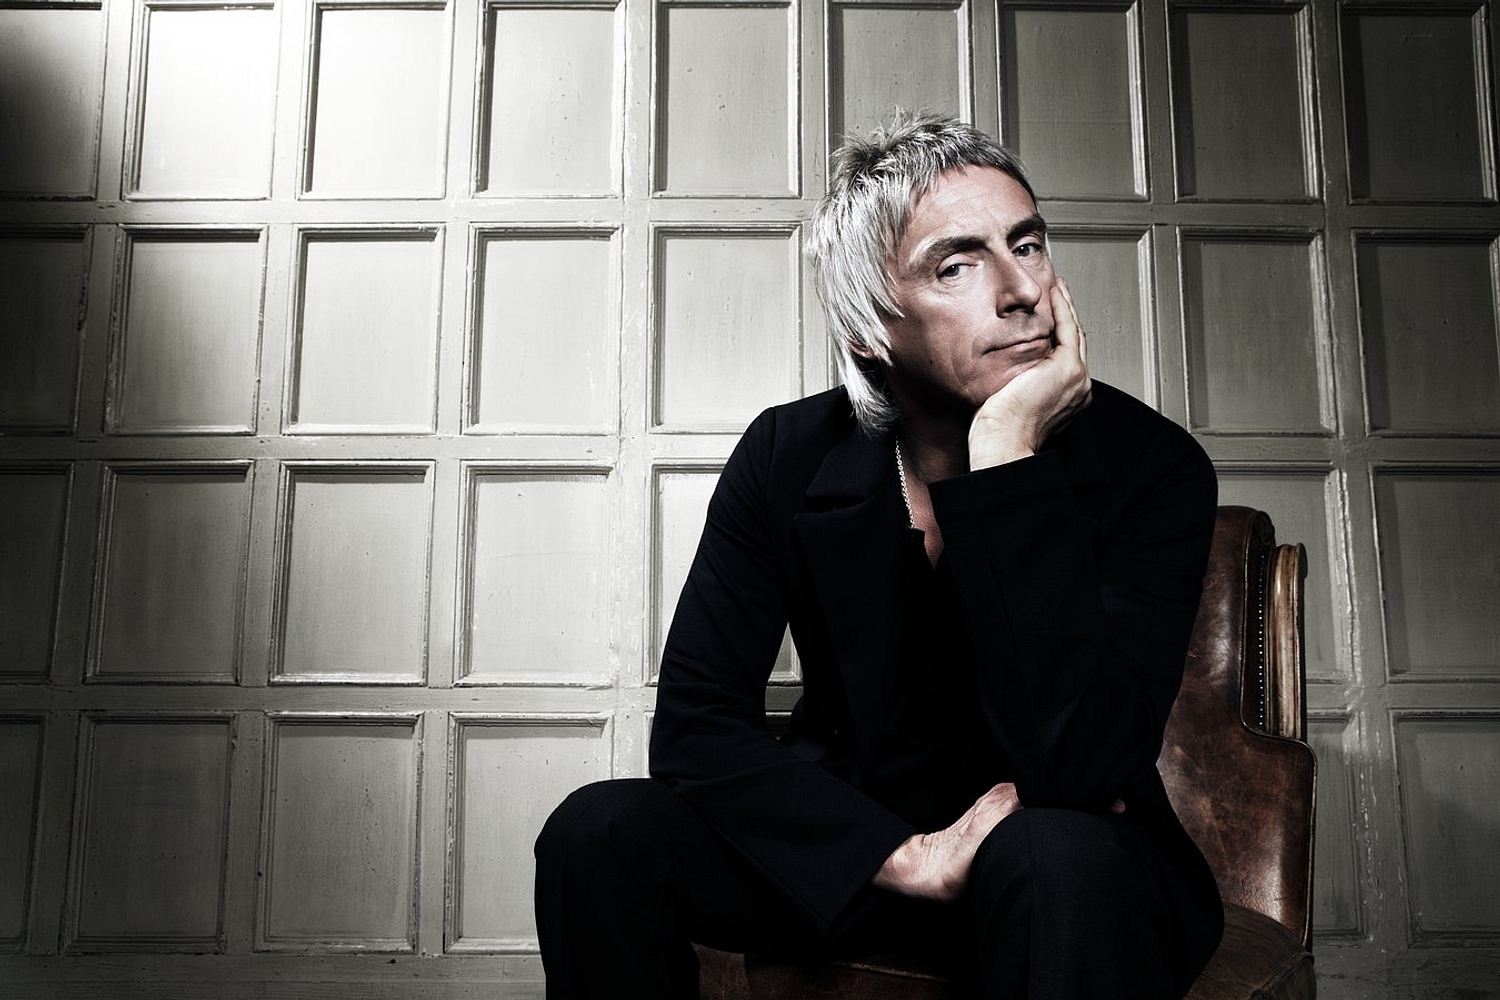 Paul Weller to play The Great Escape show at a secret location